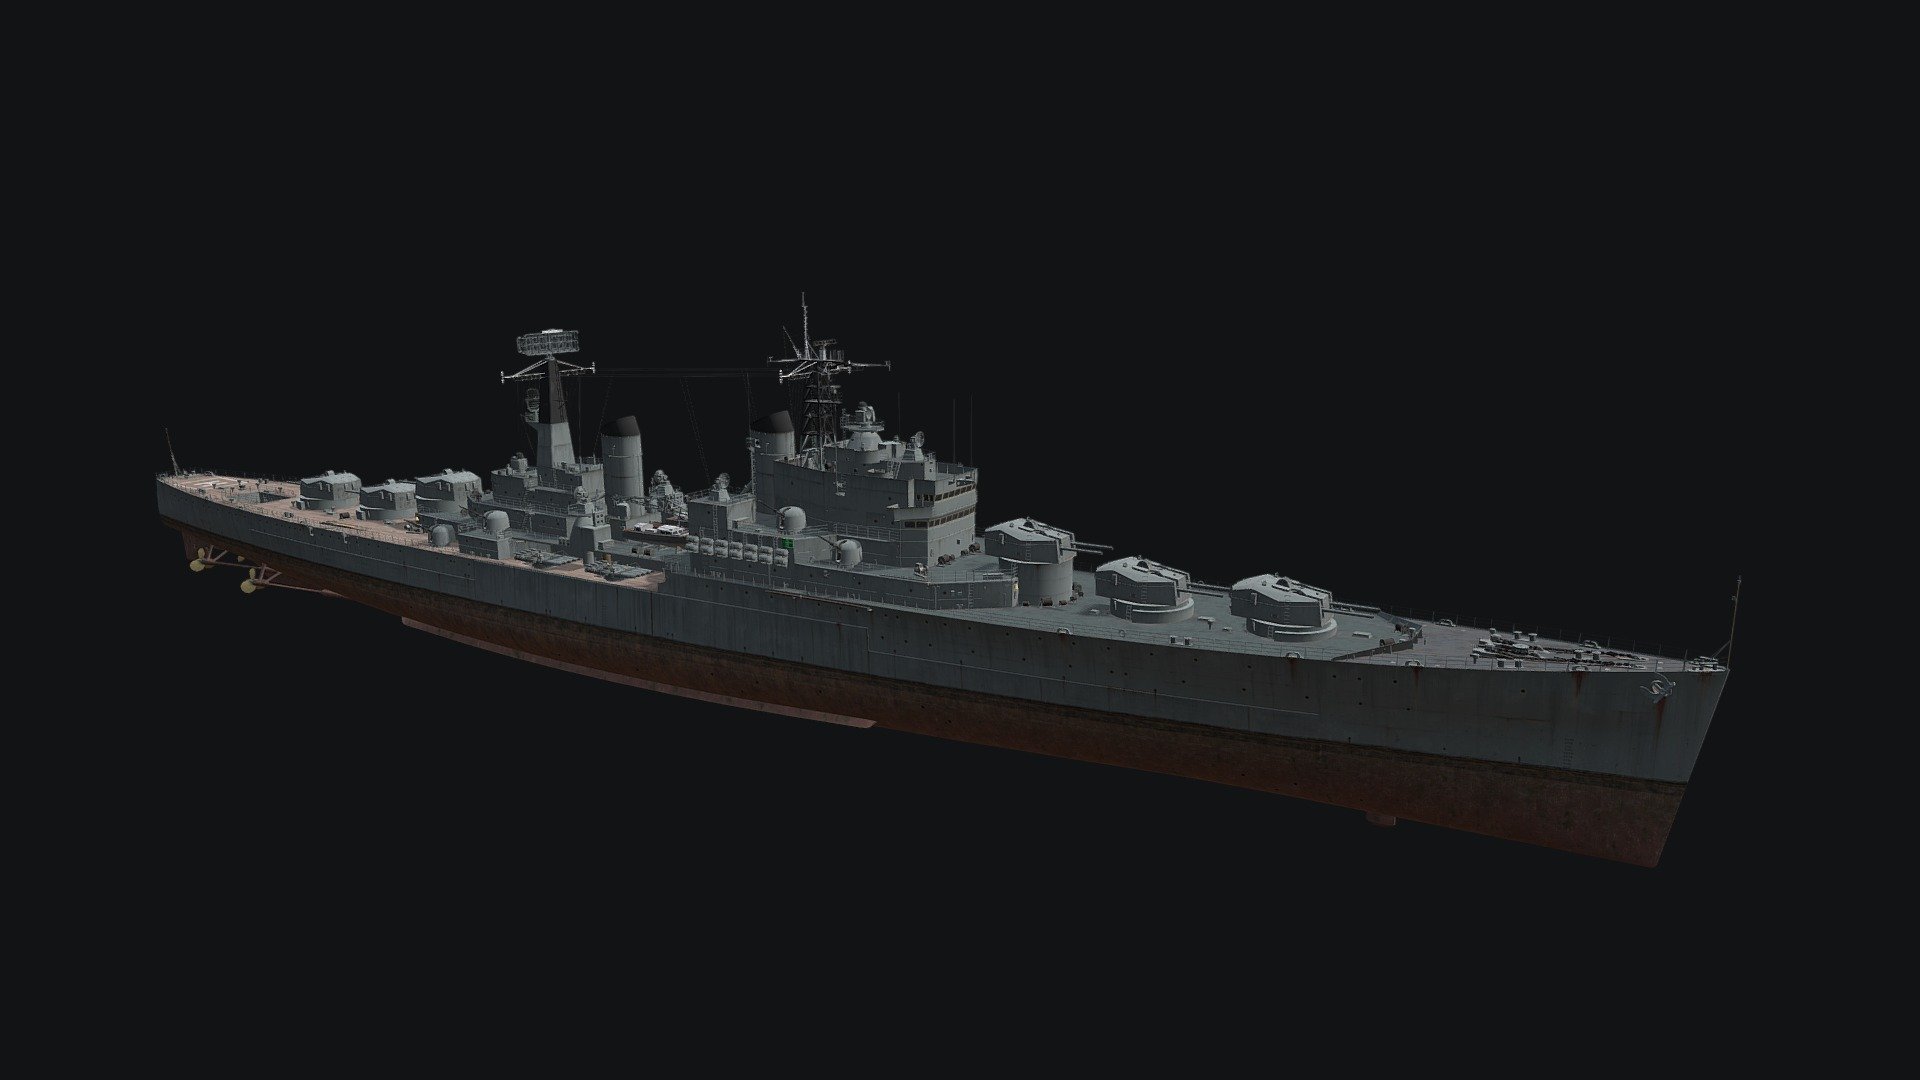 This model was developed by Wargaming for their popular game ‘World of Warships’. Play World of Warships now to send these ships into battle!

Use the following link to start playing!

https://worldofwarships.com/

Edgar — British Tier ★ cruiser.

The development of a Minotaur cruiser project with an increased number of main battery guns, as well as more advanced effective anti-submarine and AA weaponry, developed in the 1950s and 1960s 3d model